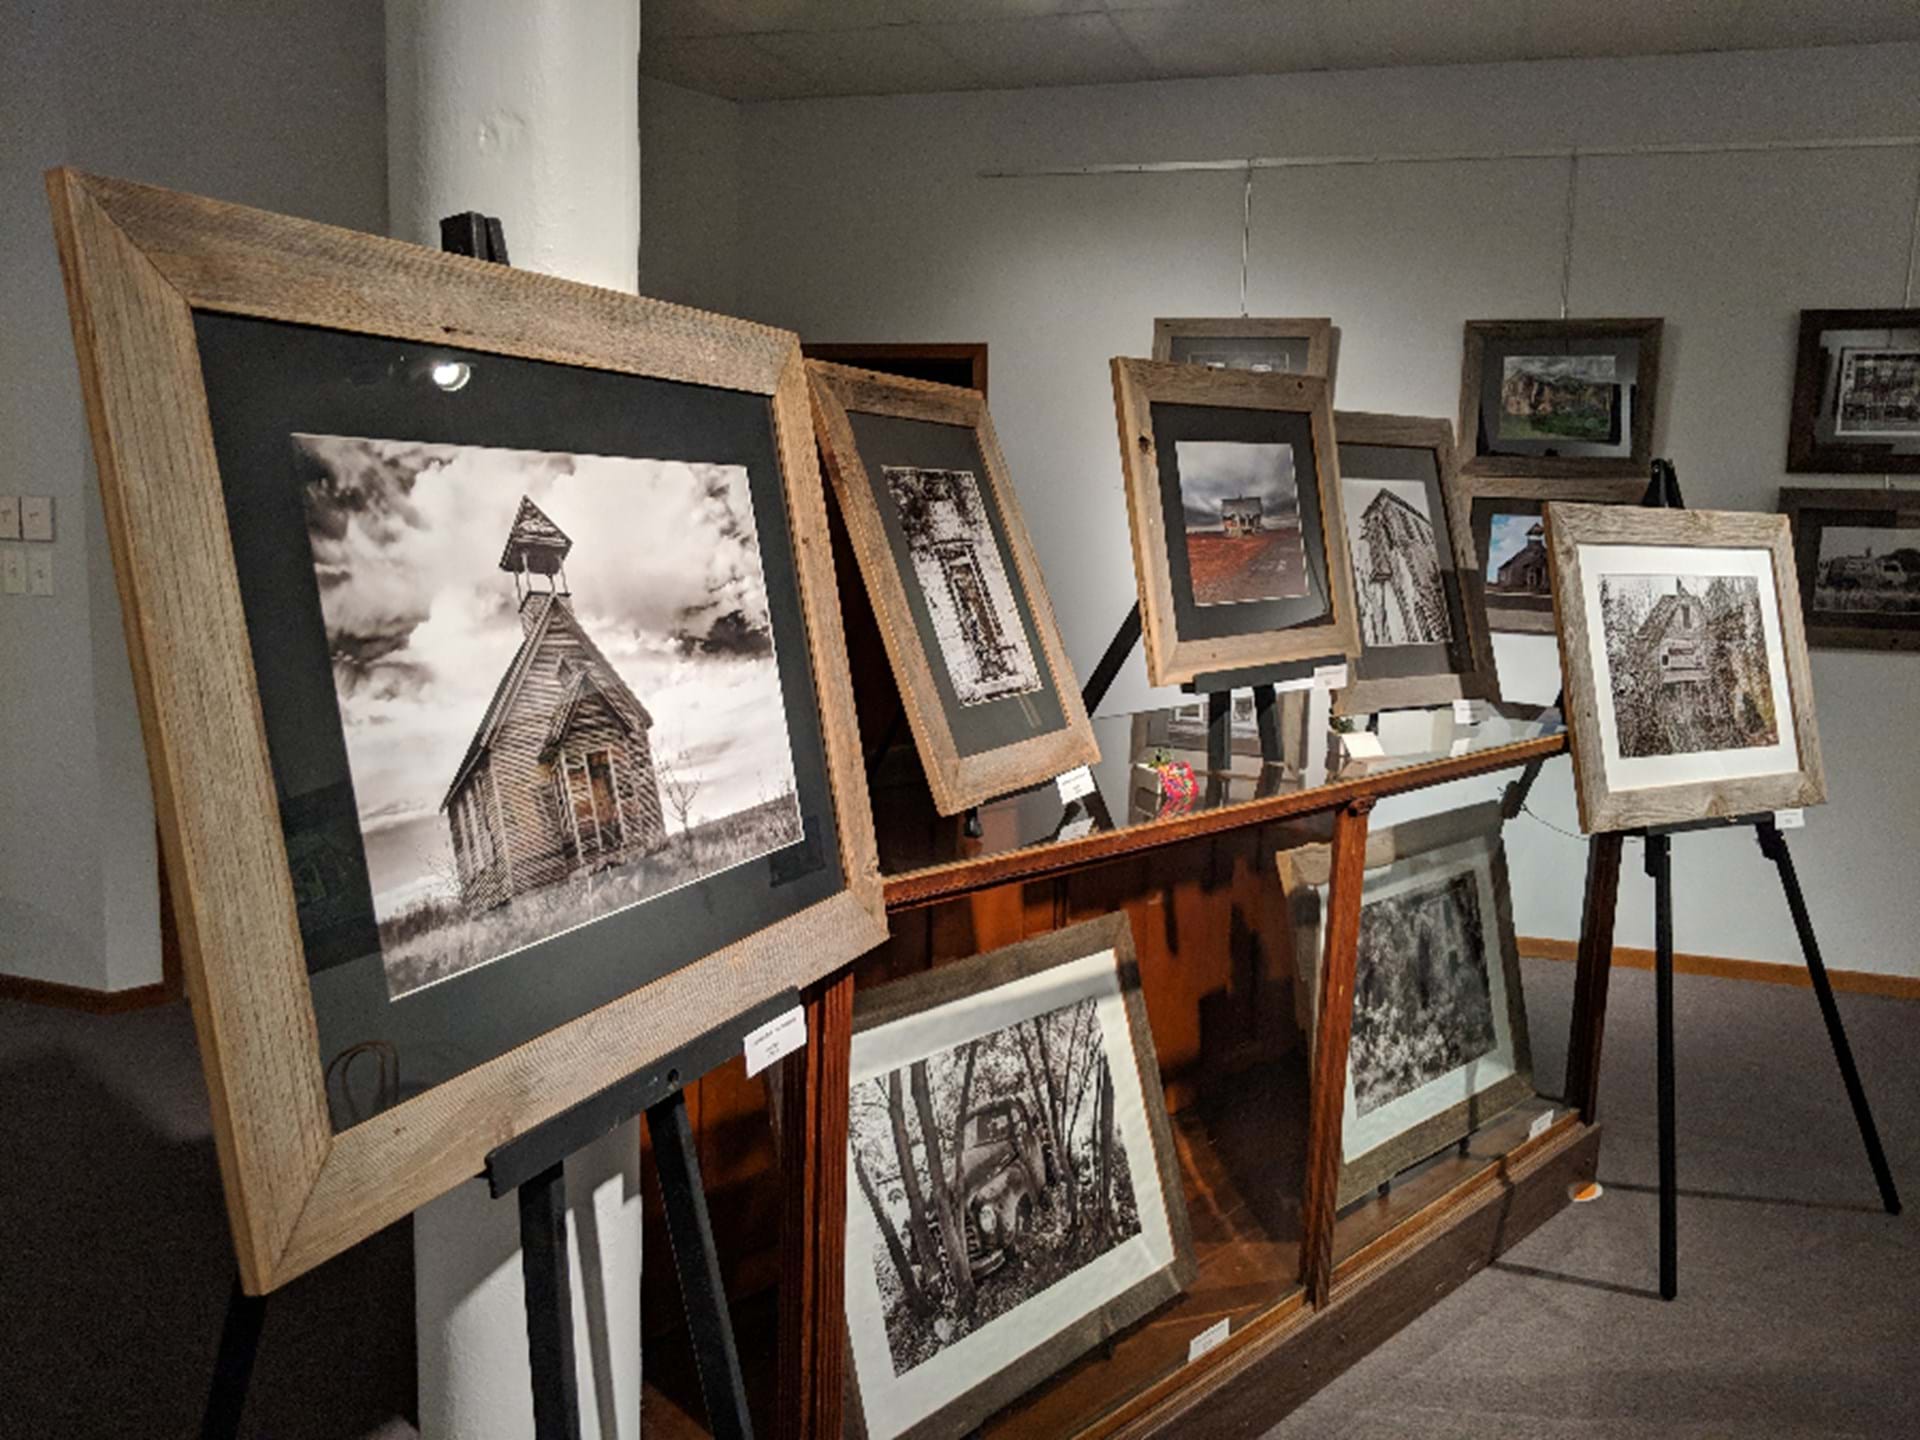 Local artists featured as part of the permanent collection